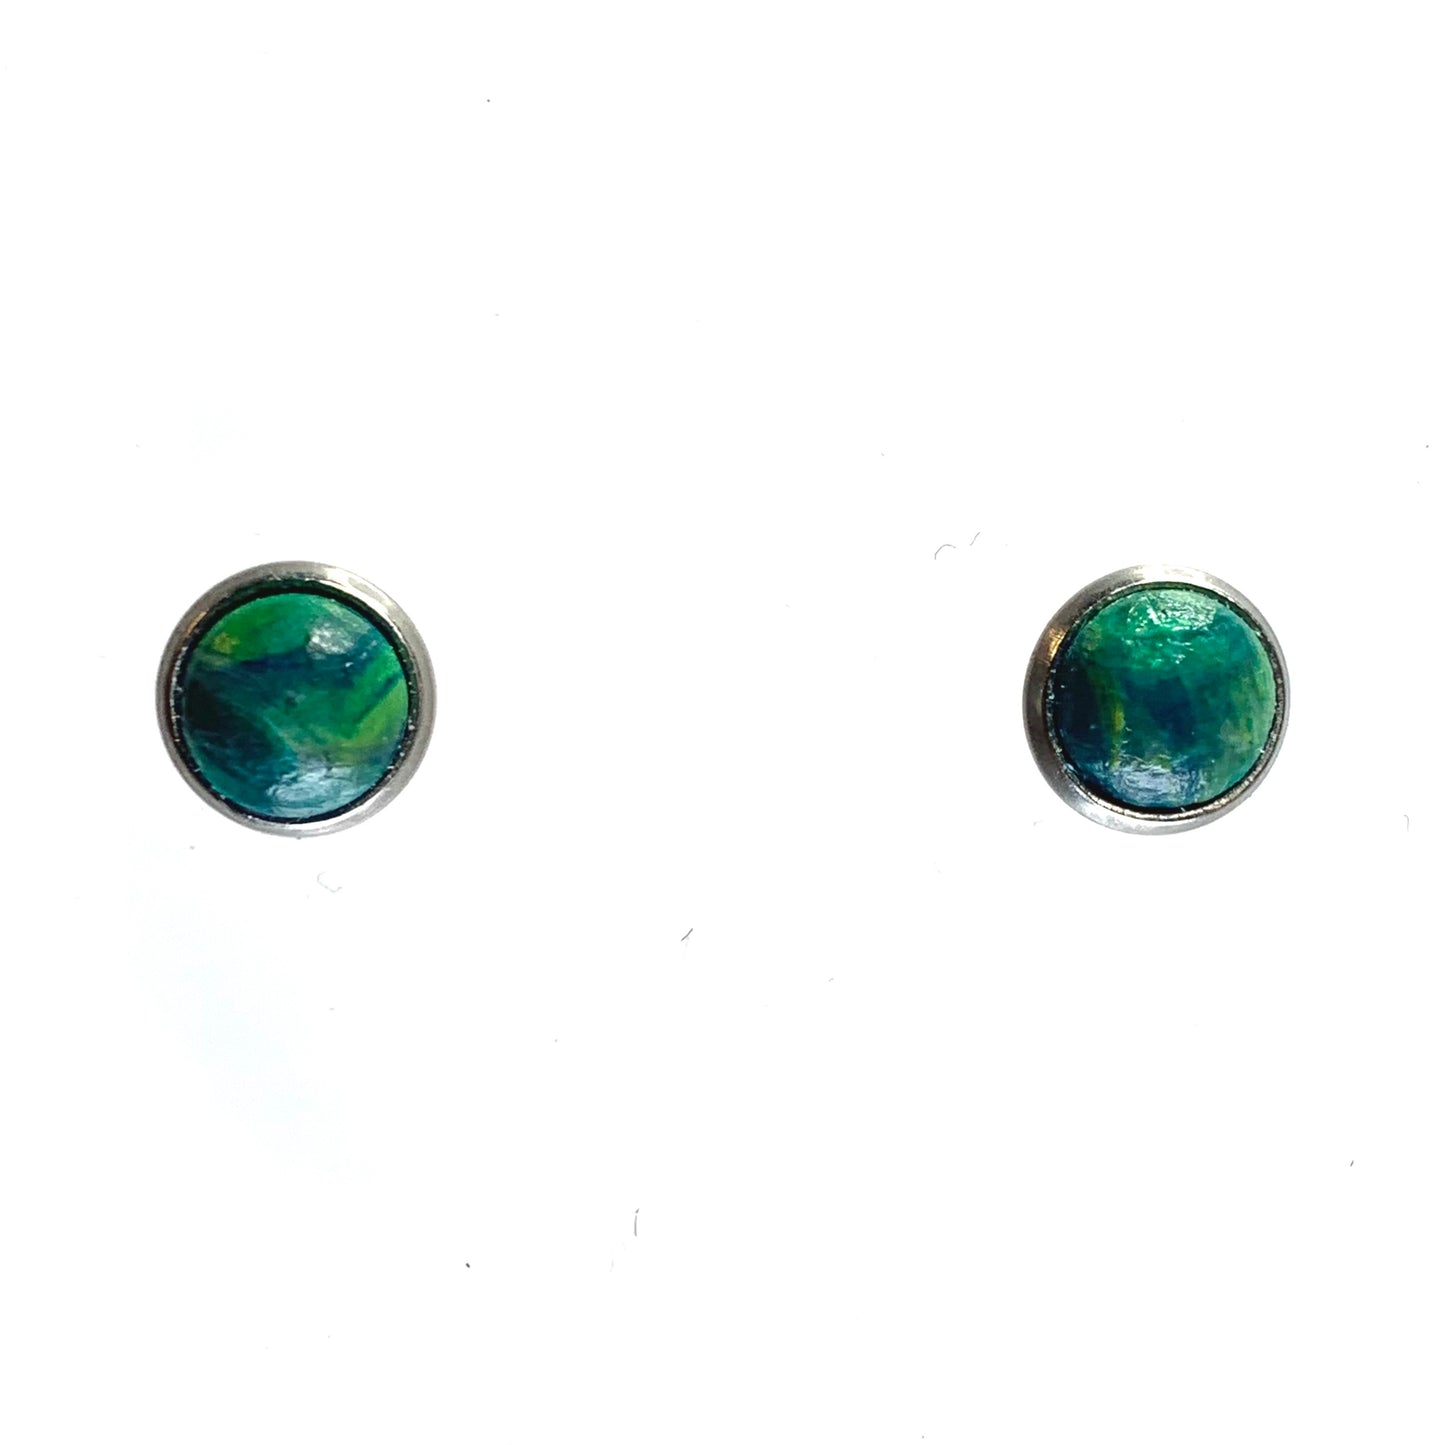 Handmade recycled plastic Studs green navy blue stainless steal 